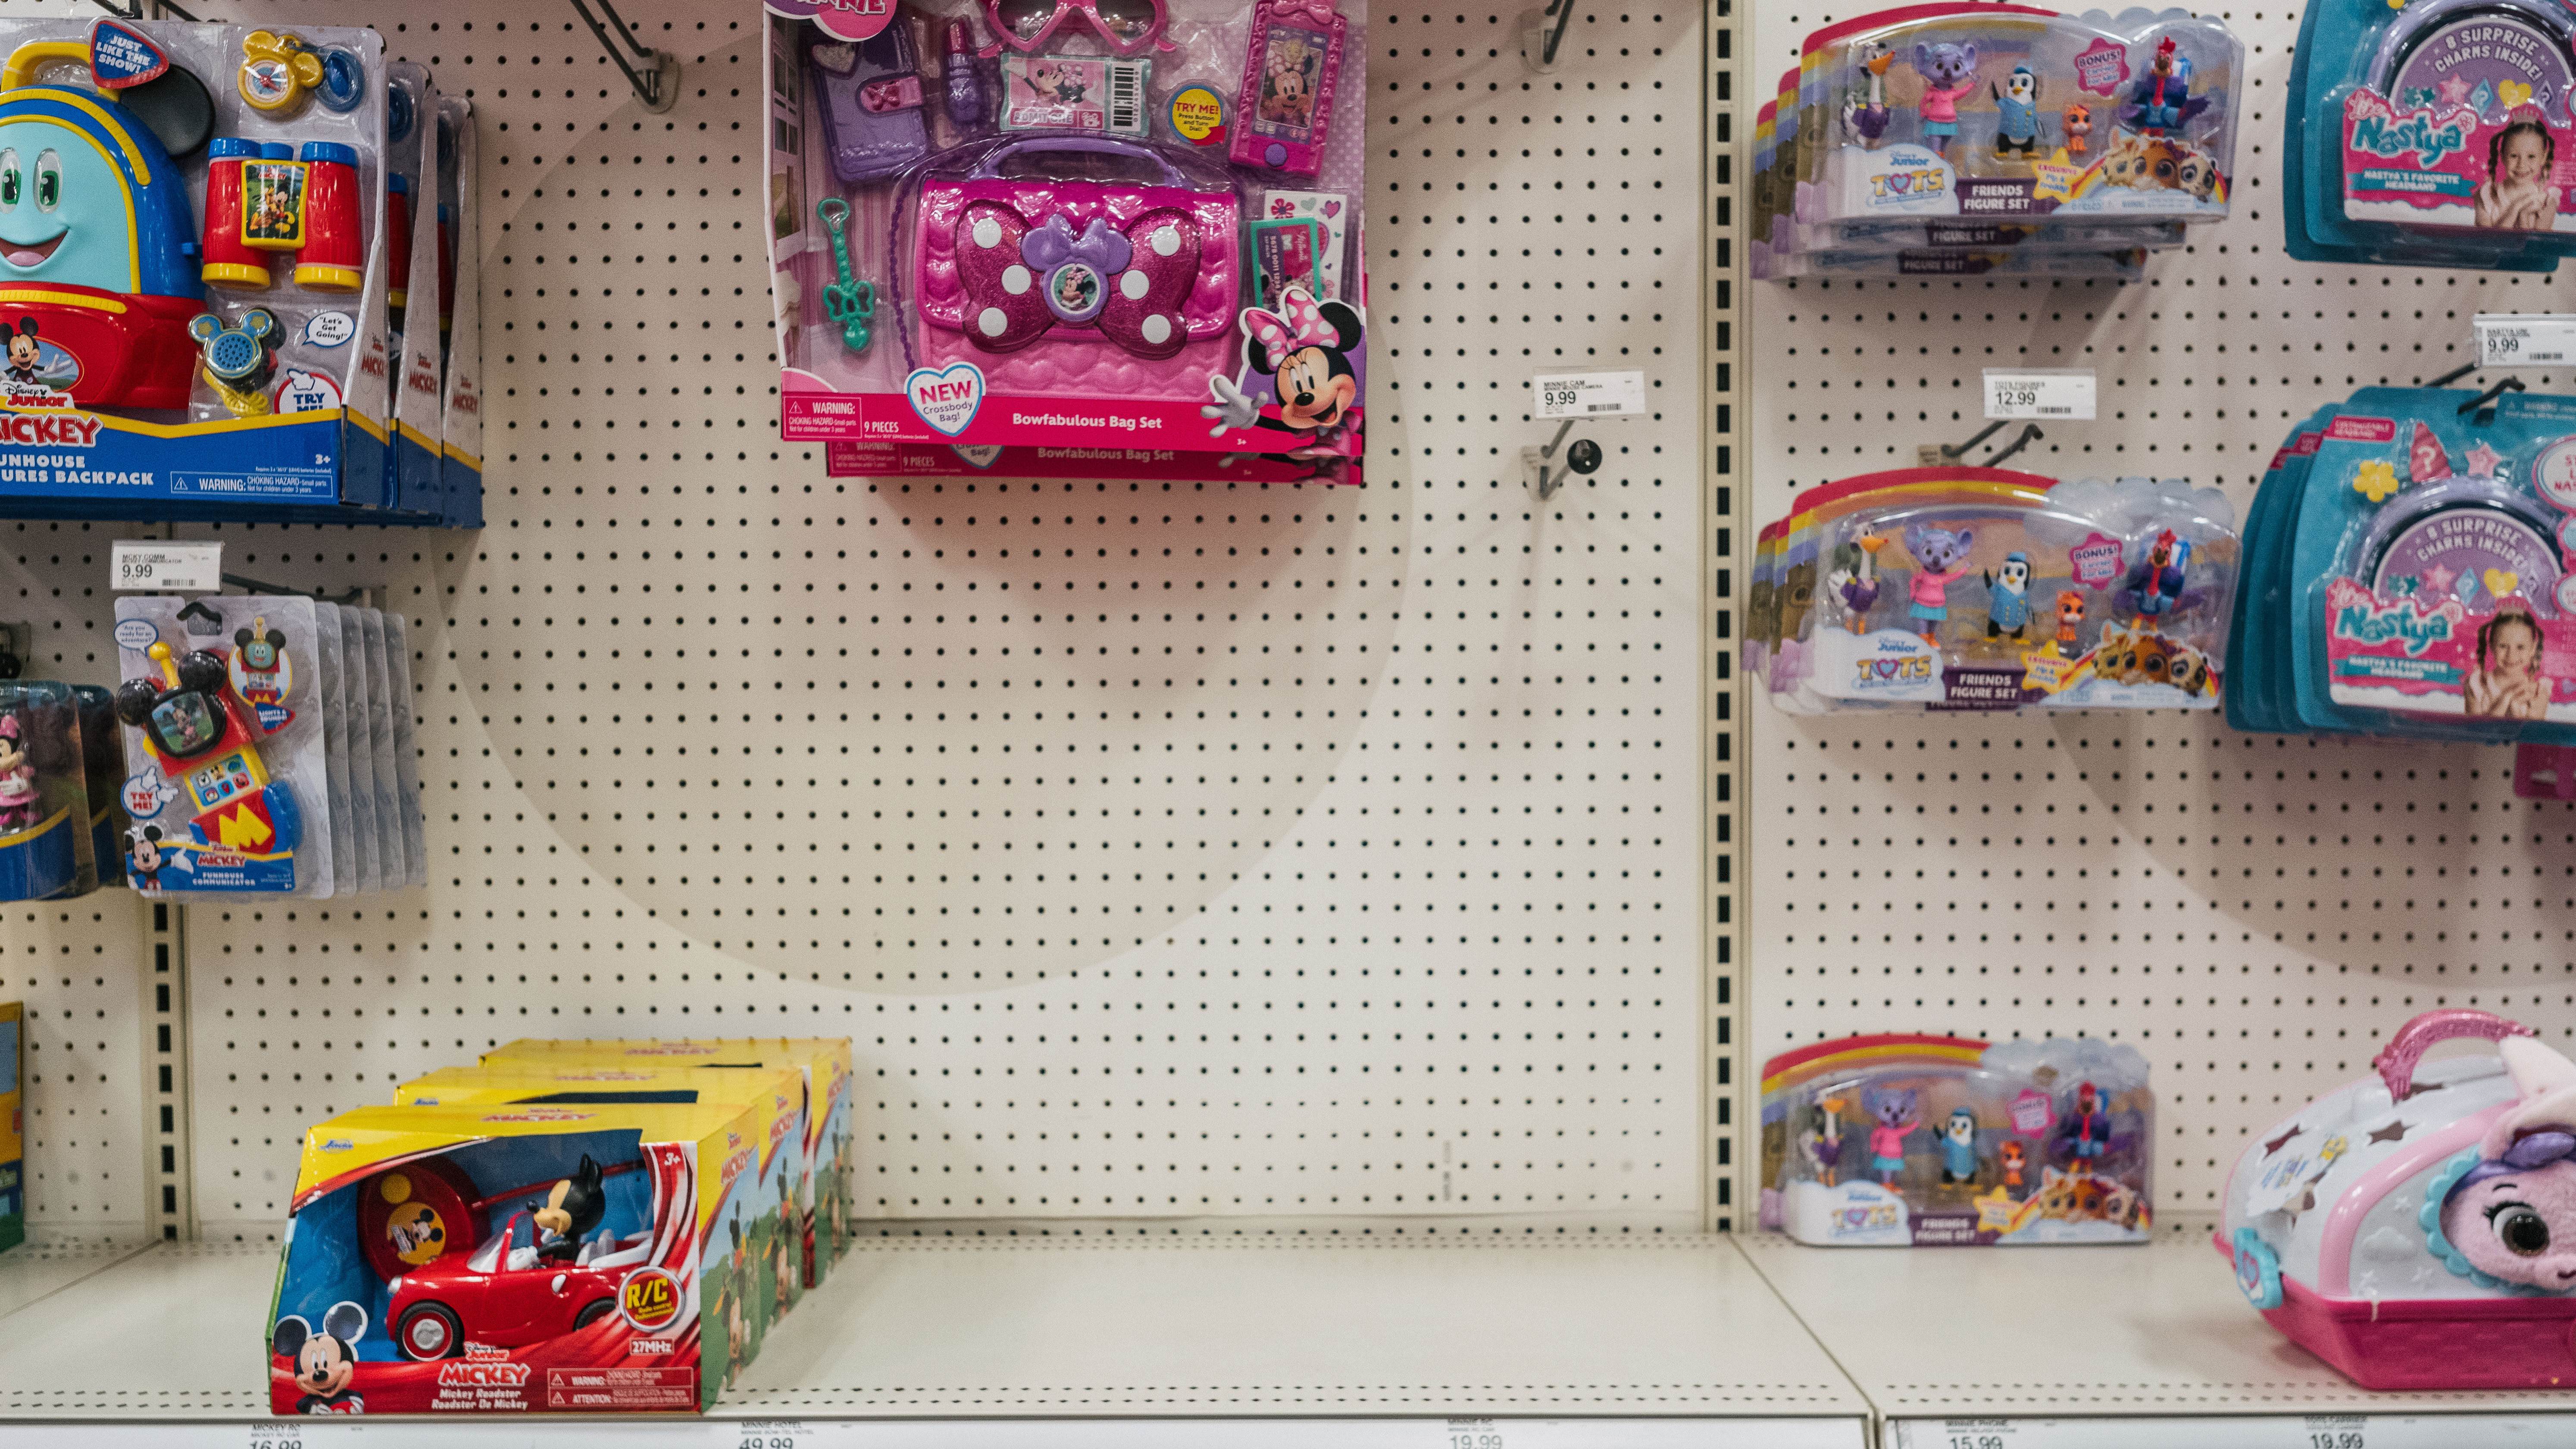 The Toy Insider editor-in-chief Marissa Silva on how supply chain disruptions are impacting the toy market.